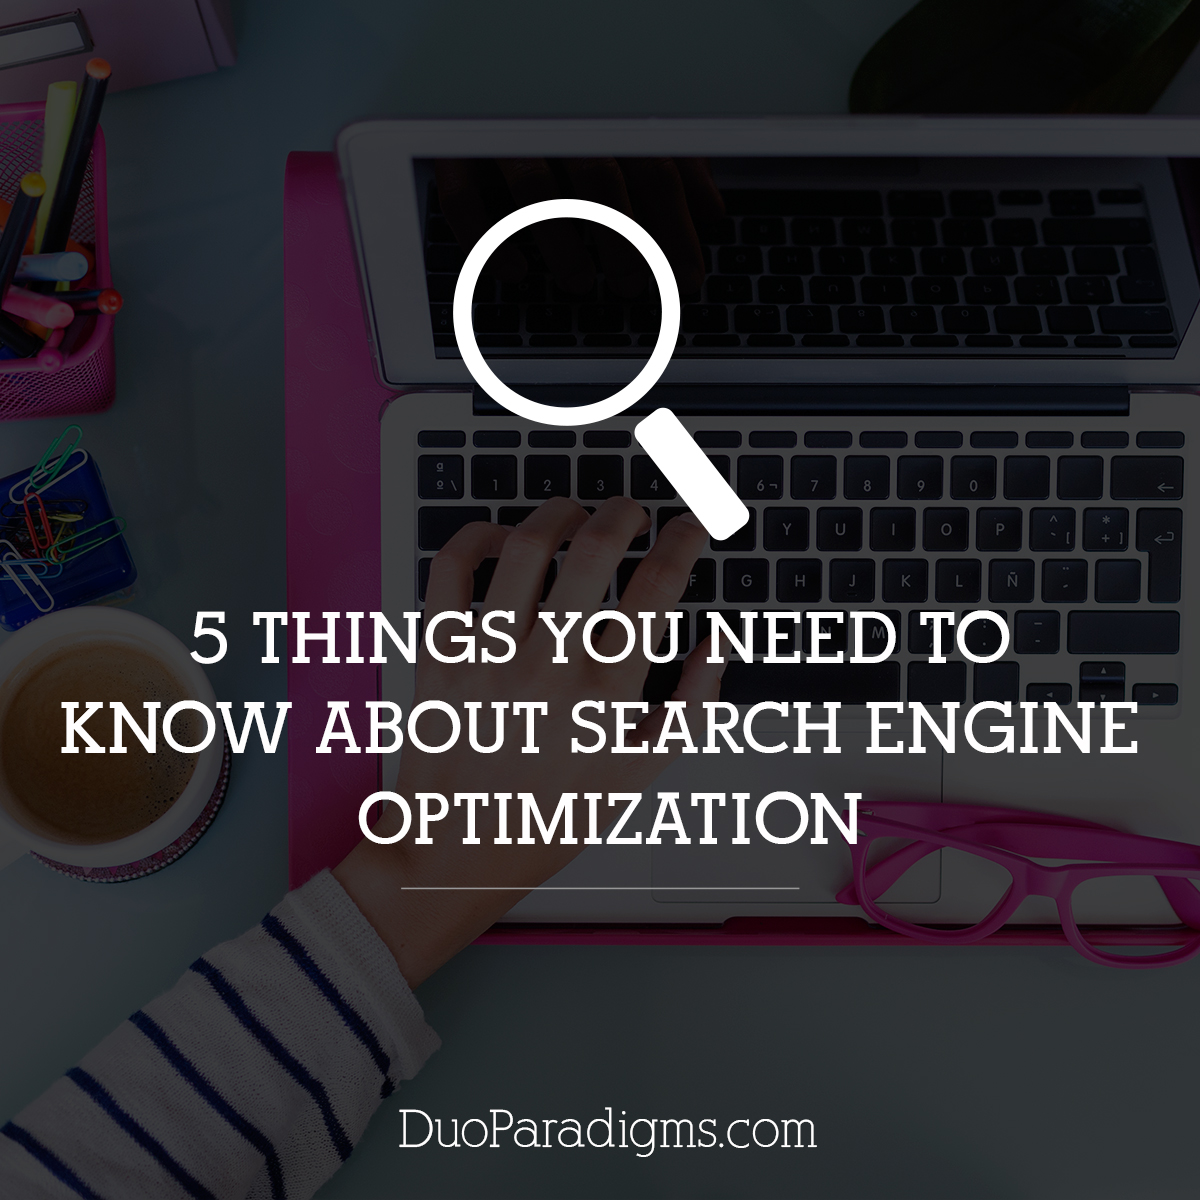 5 Things You Need to Know About Search Engine Optimization